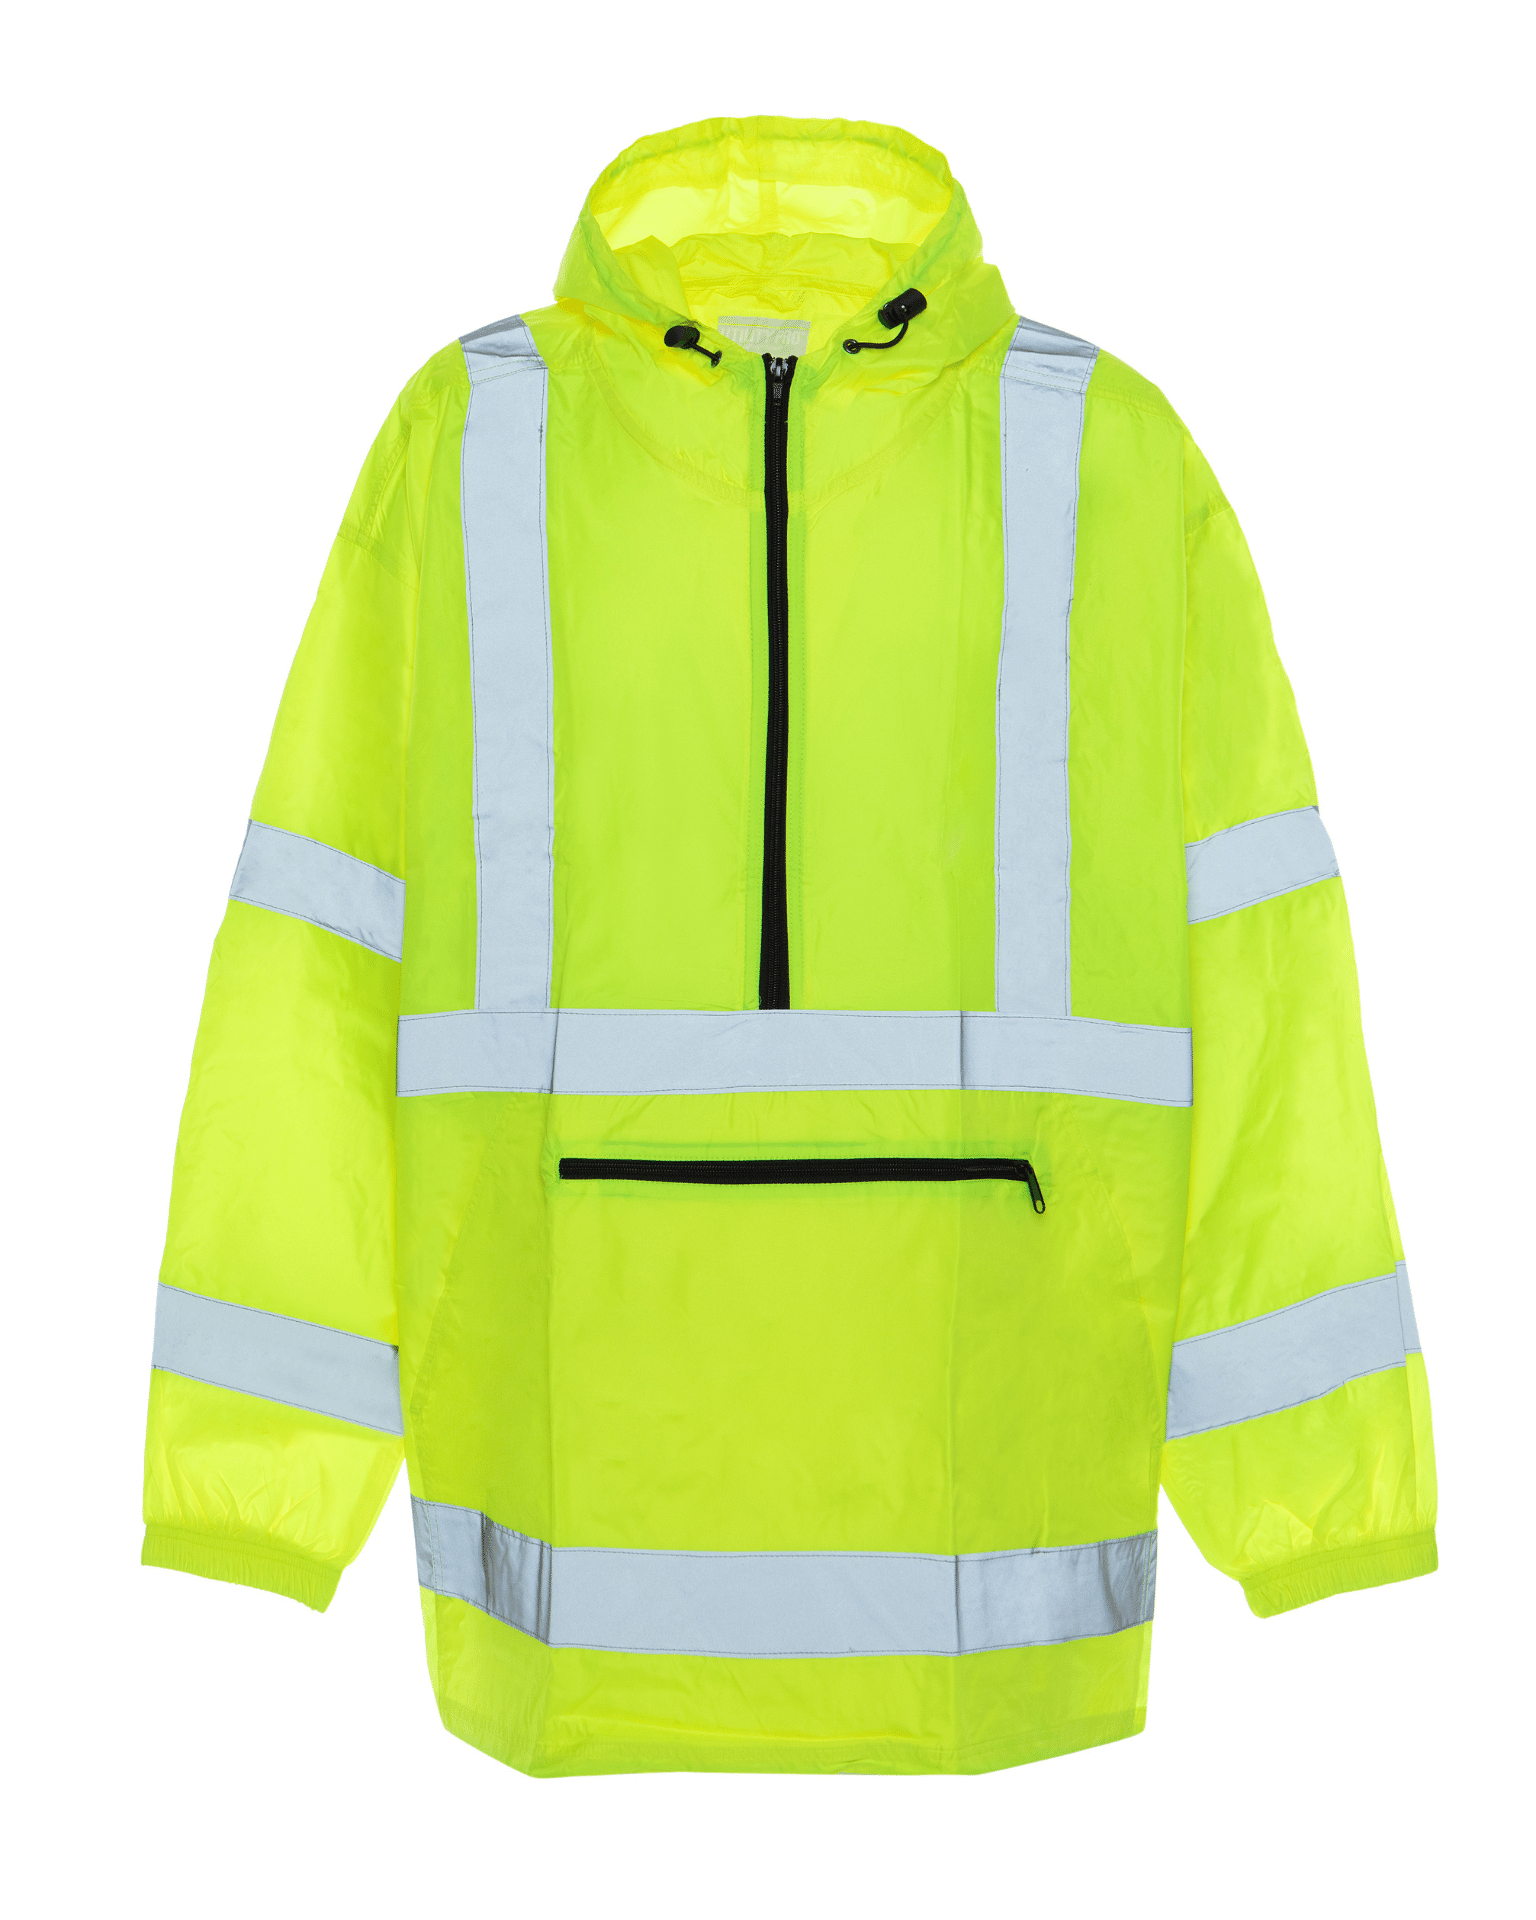 Utility Pro Wear CLEARANCE ITEMS UHV658 HiVis Pack Anorak